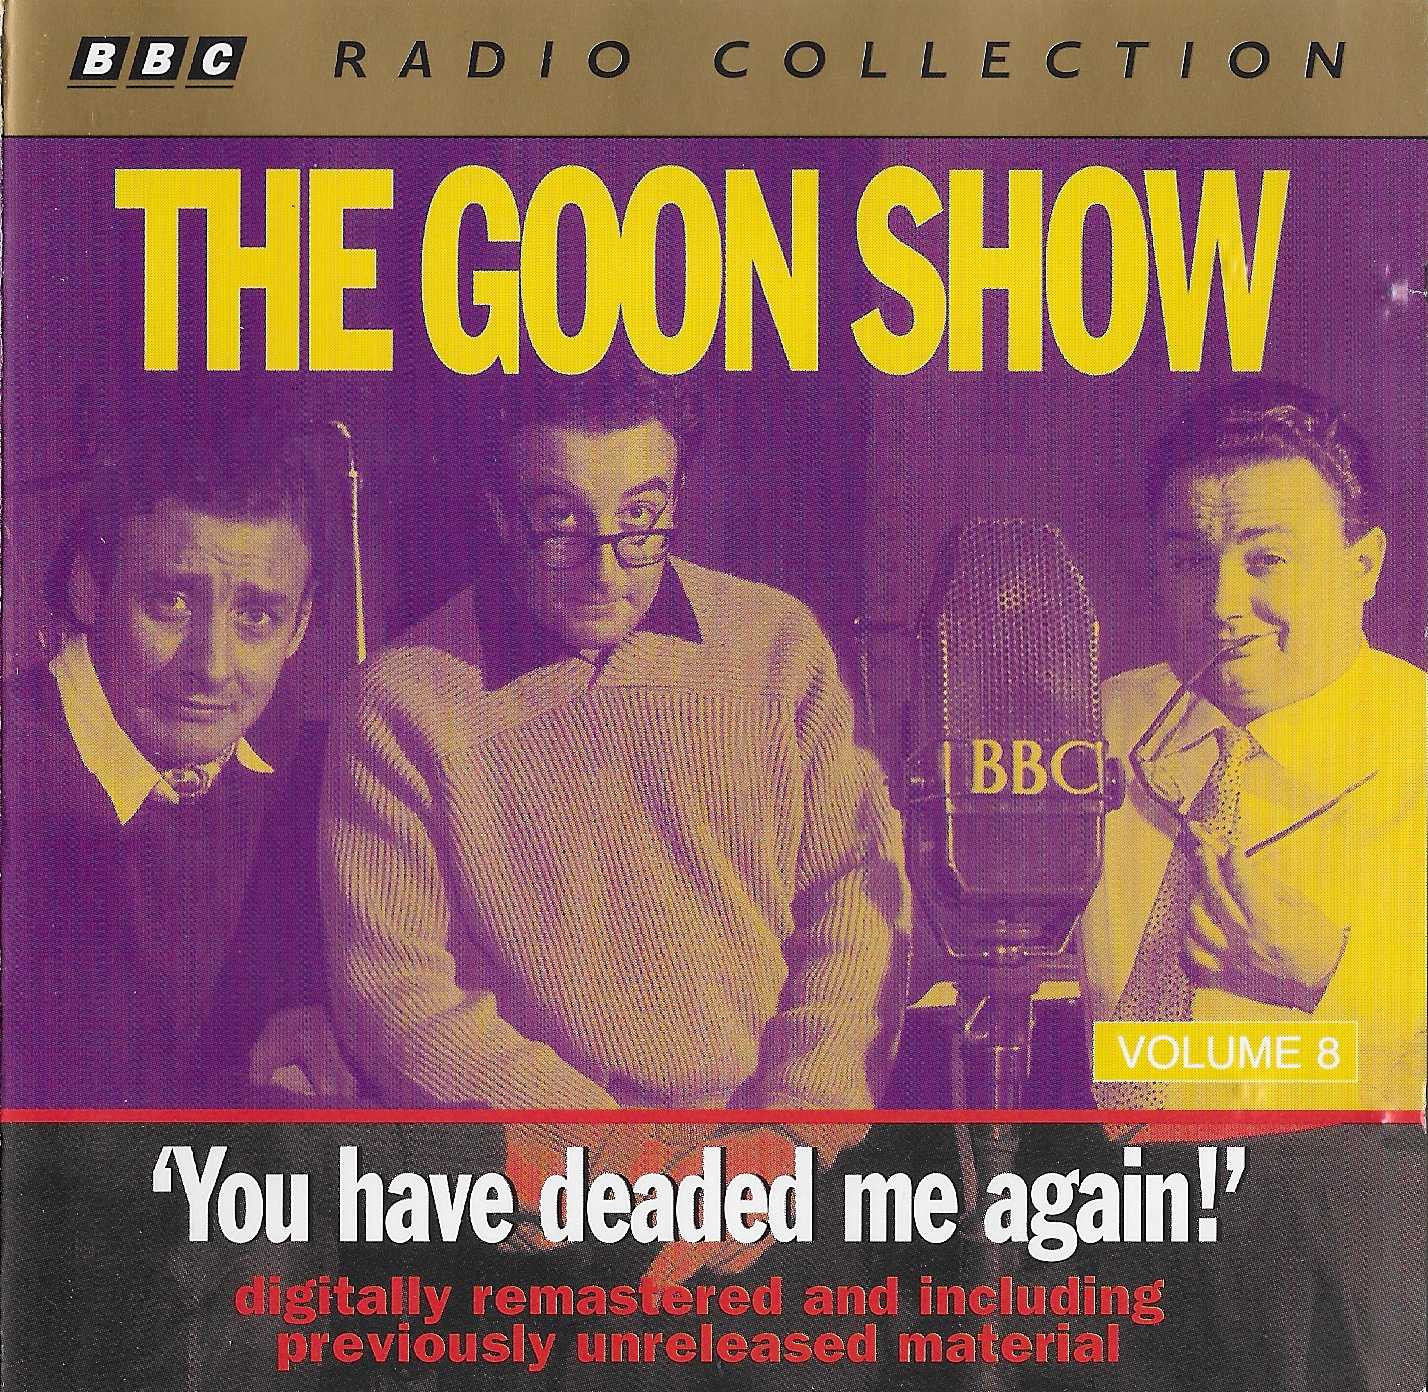 Picture of ZBBC 1871 CD The Goon Show 8 - You have deaded me again! by artist Spike Milligan / Eric Sykes from the BBC cds - Records and Tapes library